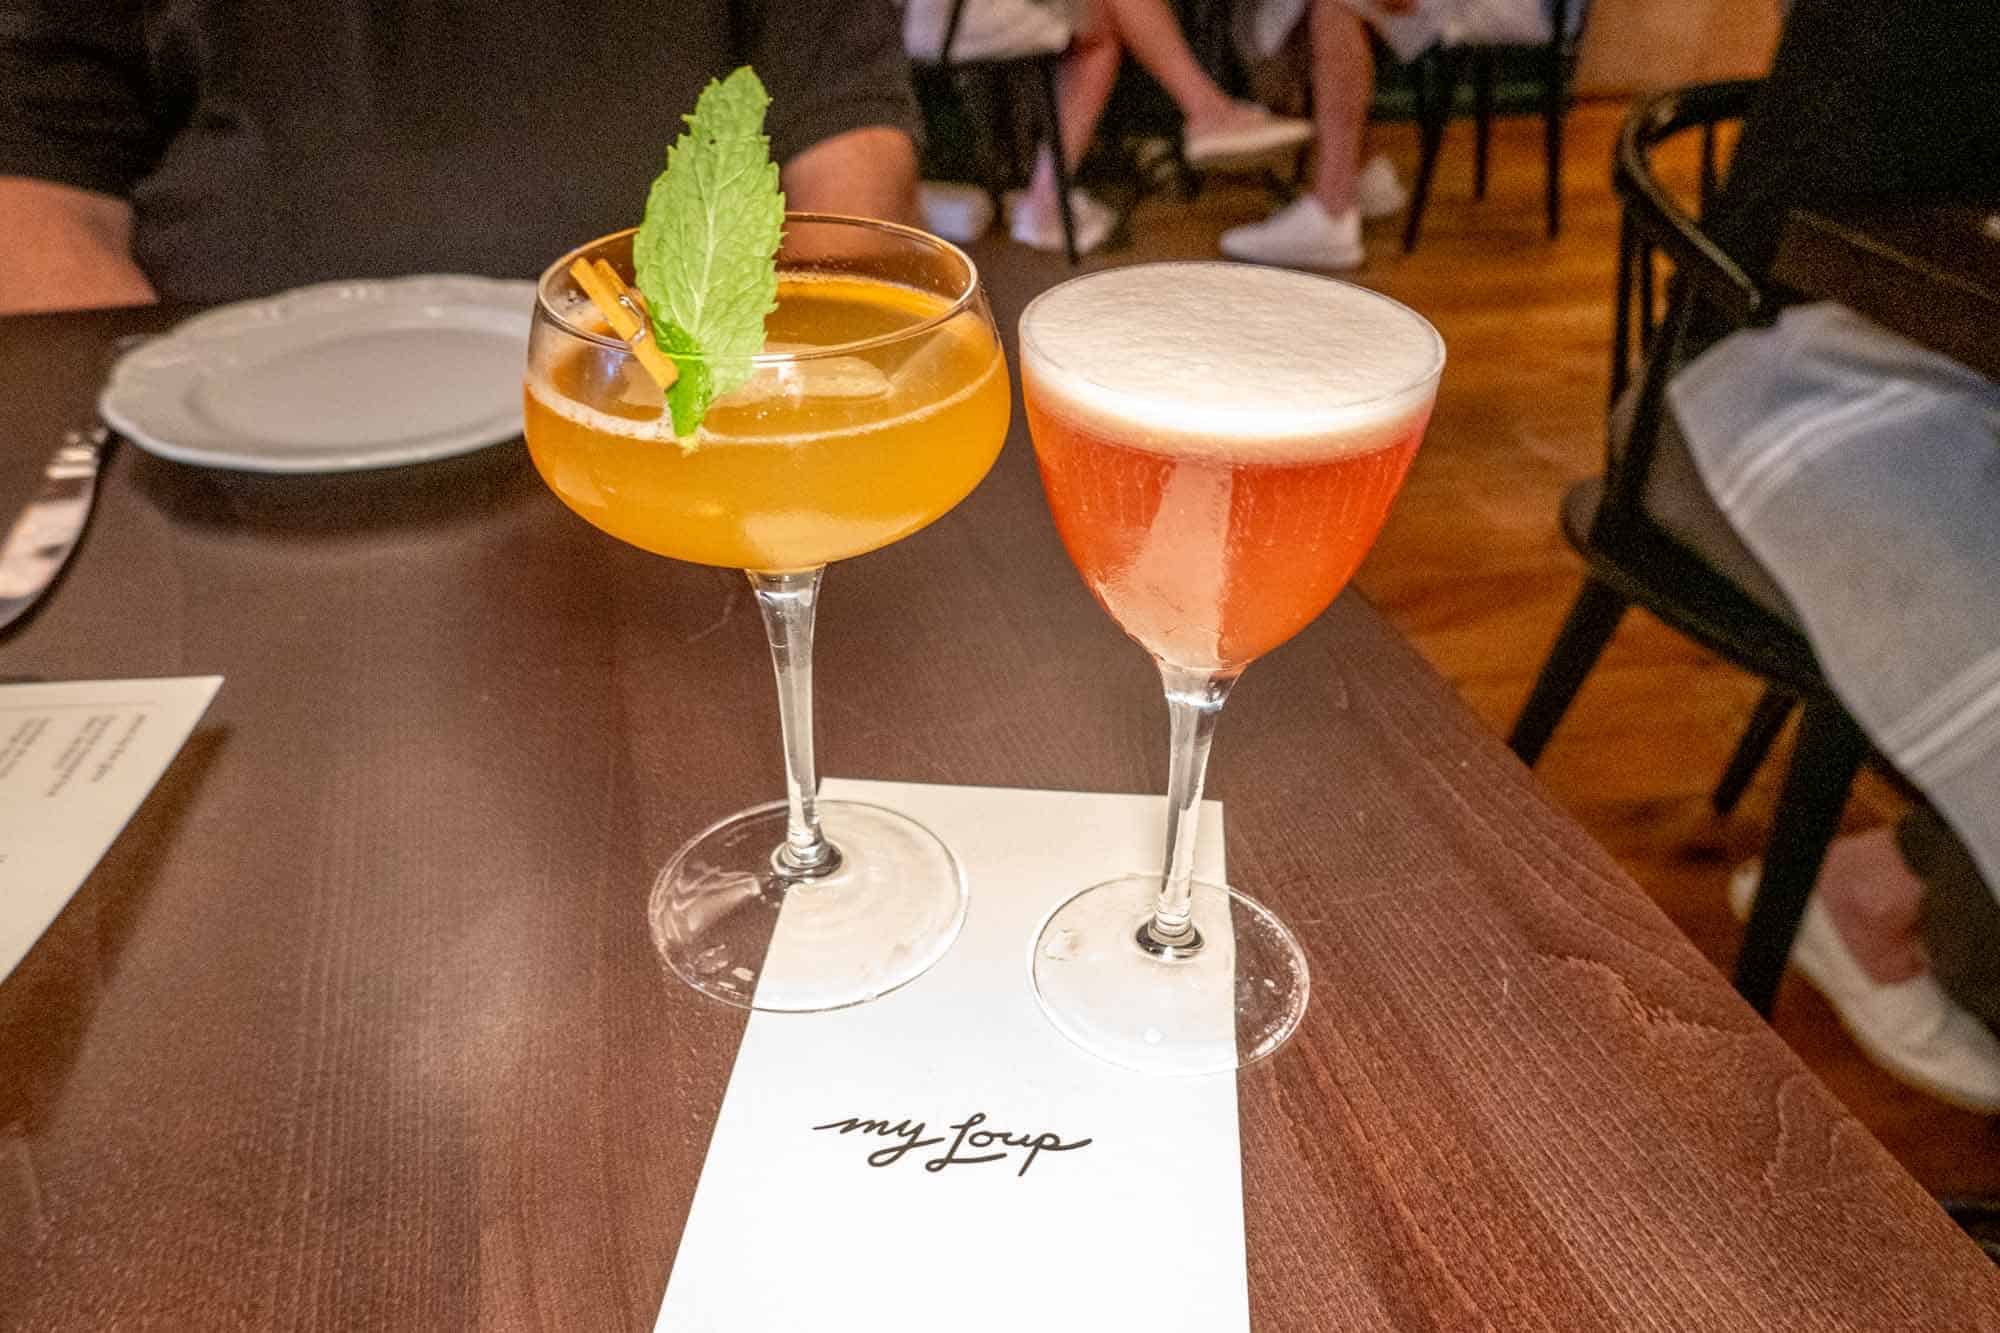 Two cocktail glasses resting on white menu that says "My Loup"